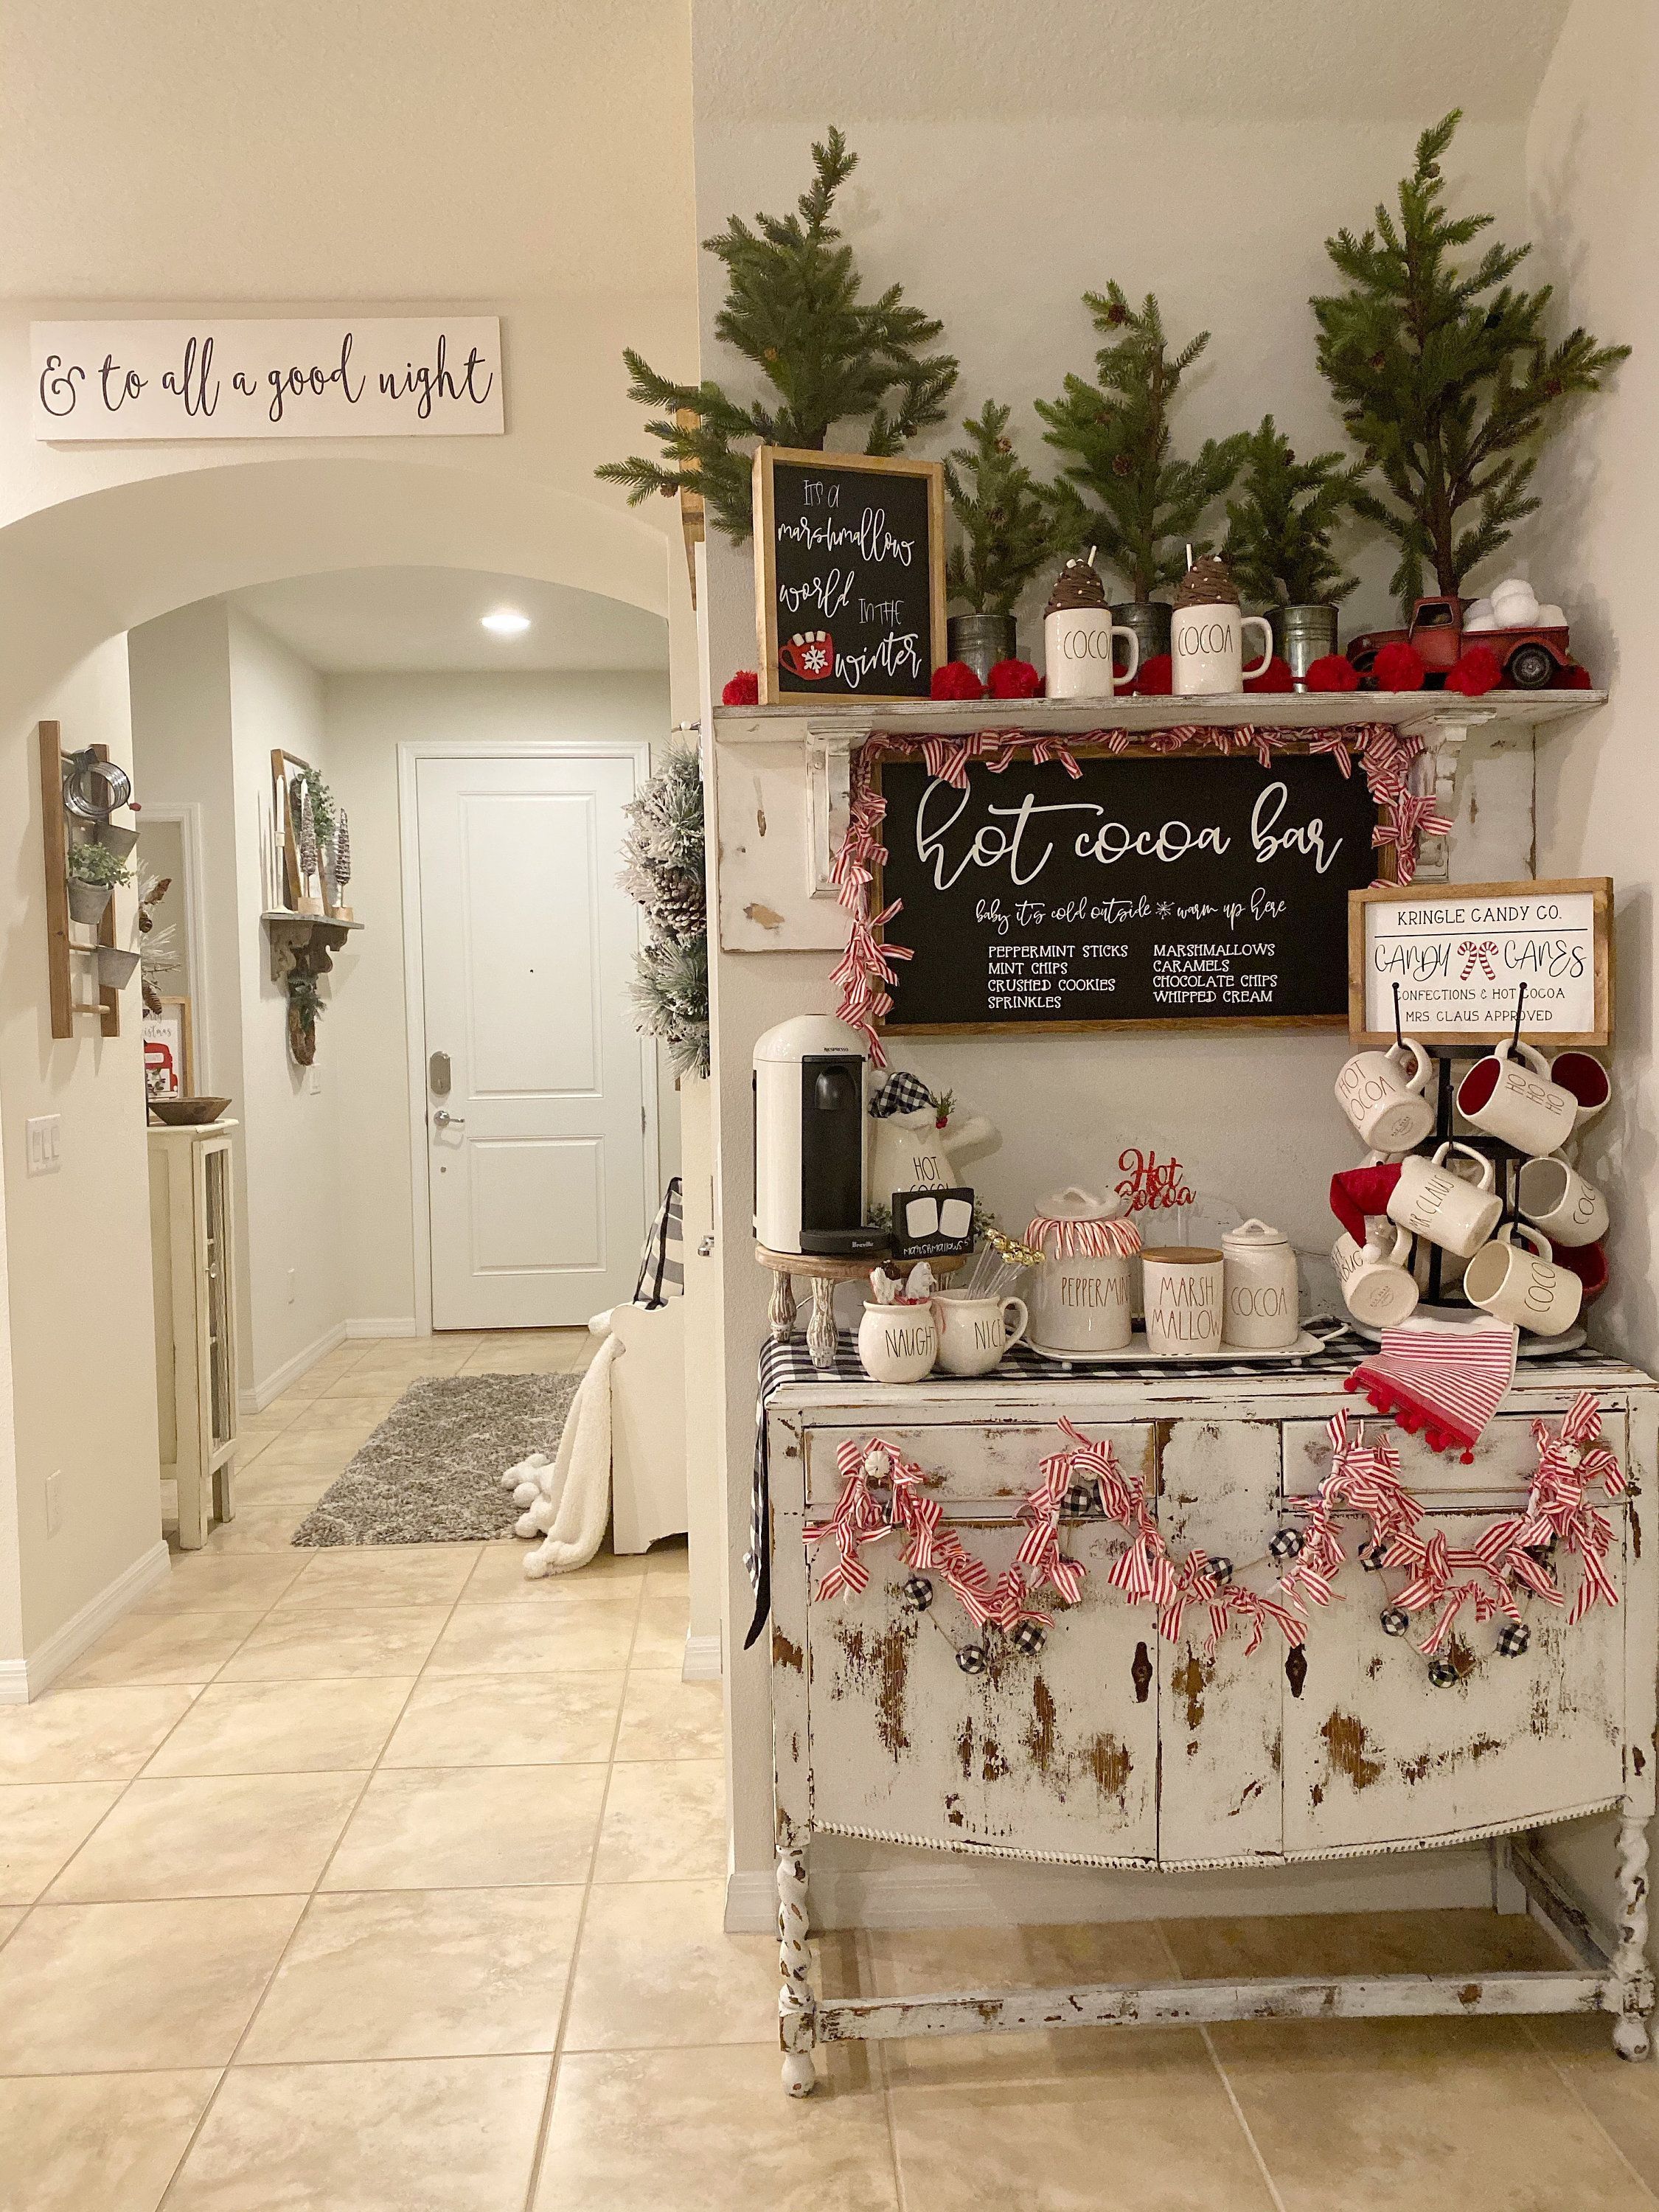 Hot cocoa bar sign, Christmas sign, winter sign, valentine sign, gift - Hot cocoa bar sign, Christmas sign, winter sign, valentine sign, gift -   19 christmas kitchen decorations farmhouse style ideas